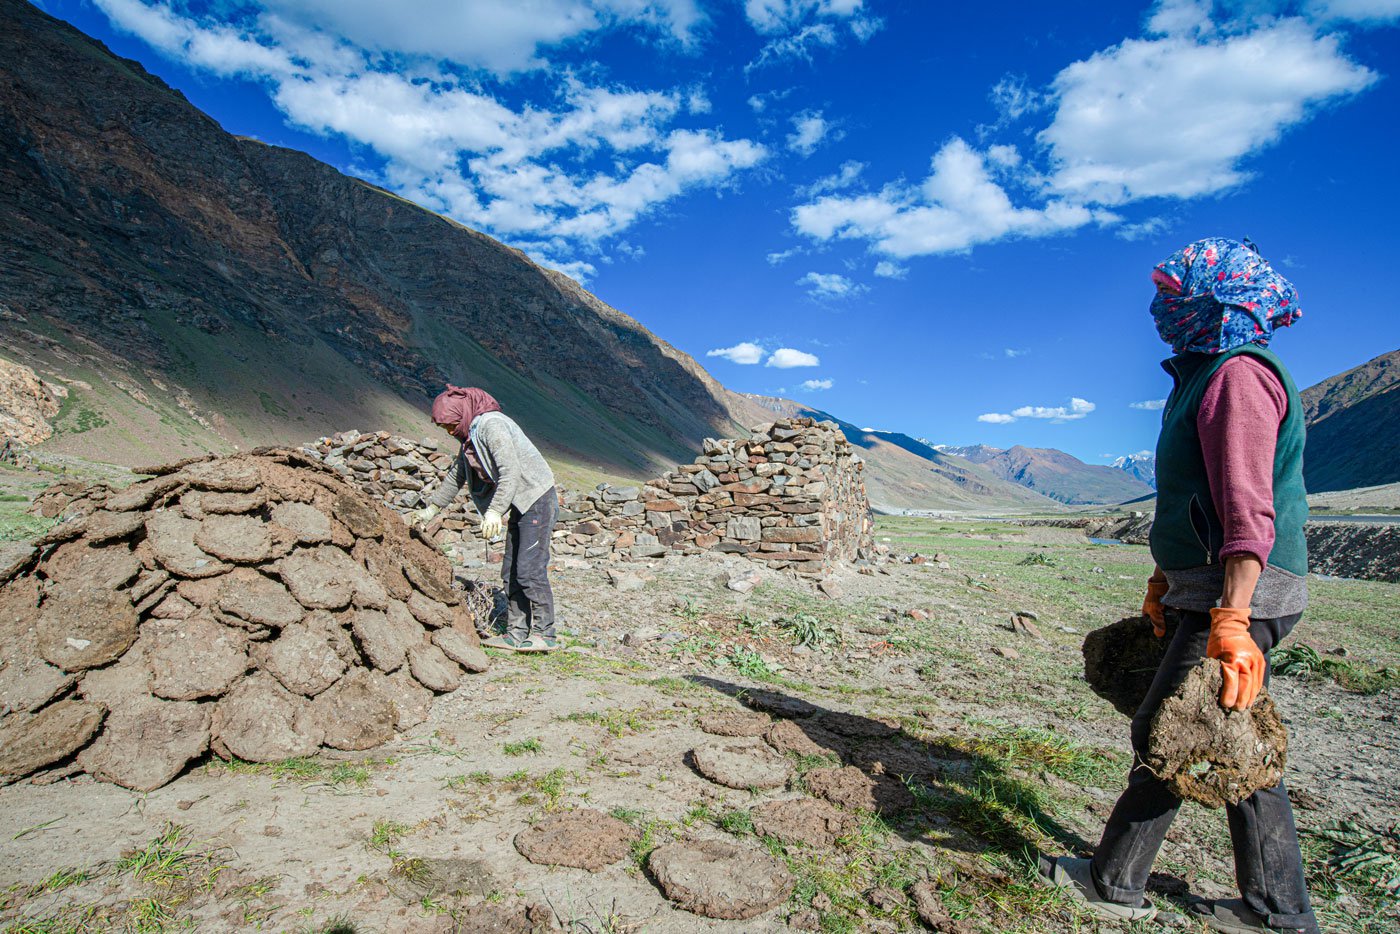 Yak dung is a significant source of fuel for people in Zanskar. It is used as cooking fuel during the winter months